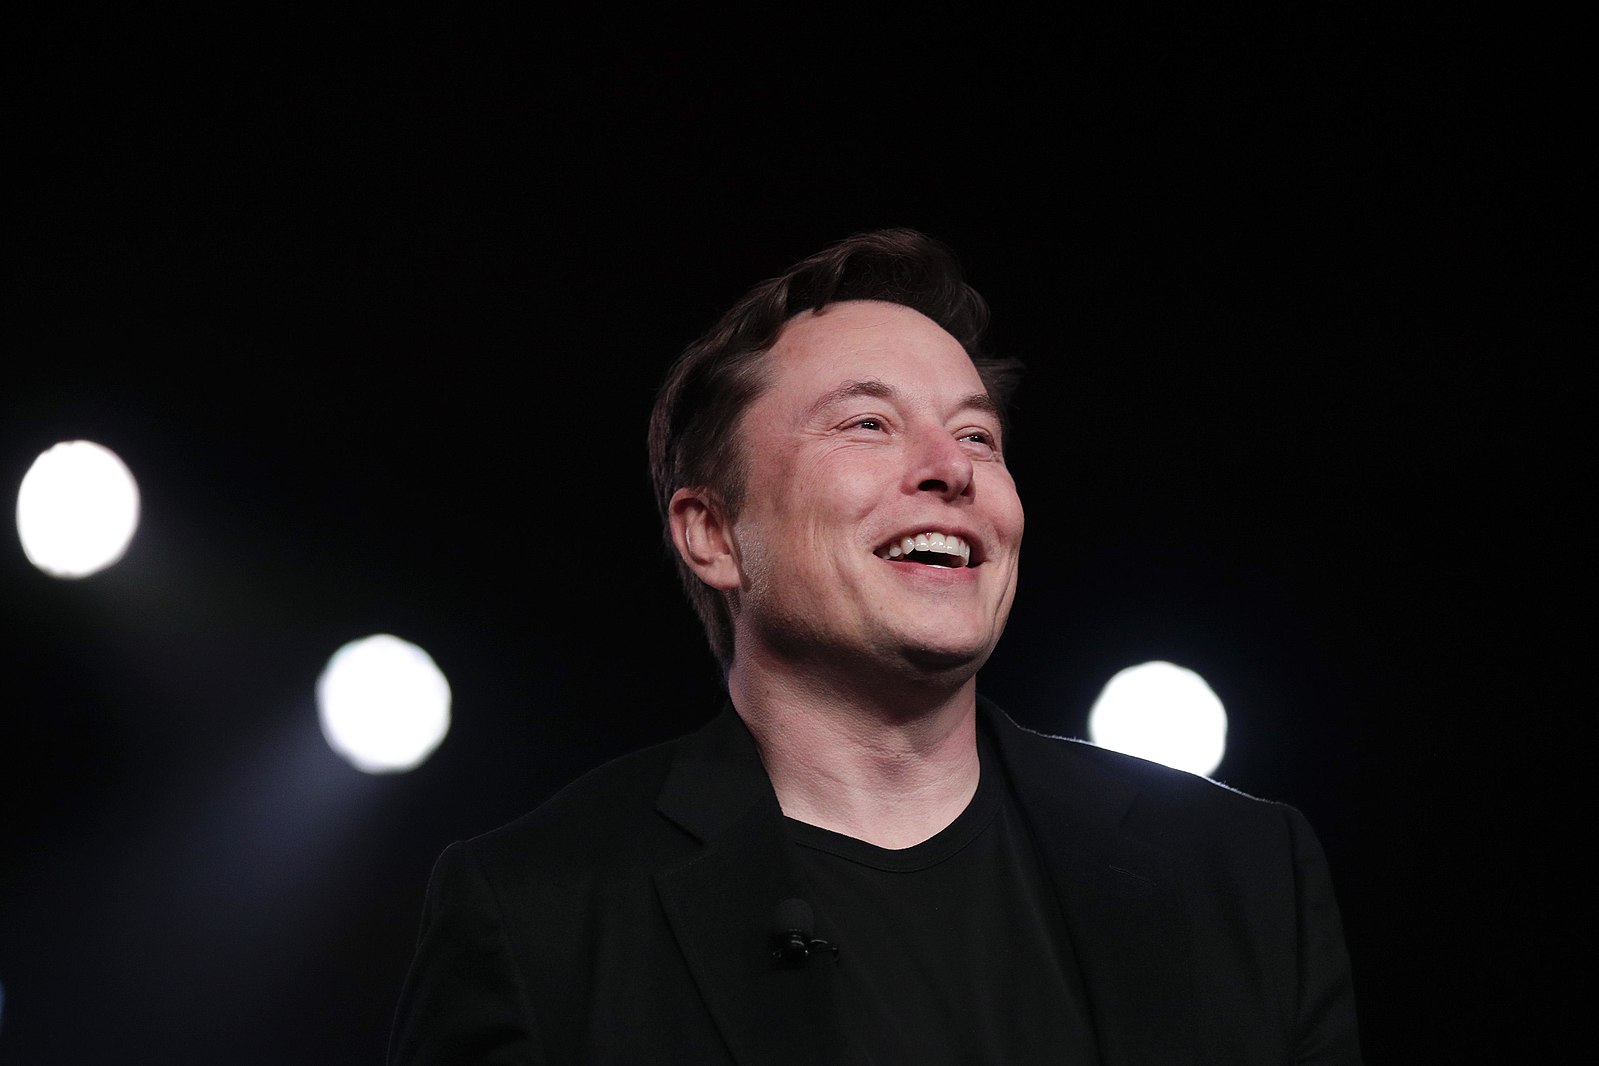 Elon Musk's Net Worth Makes Him The World's Second Richest Person